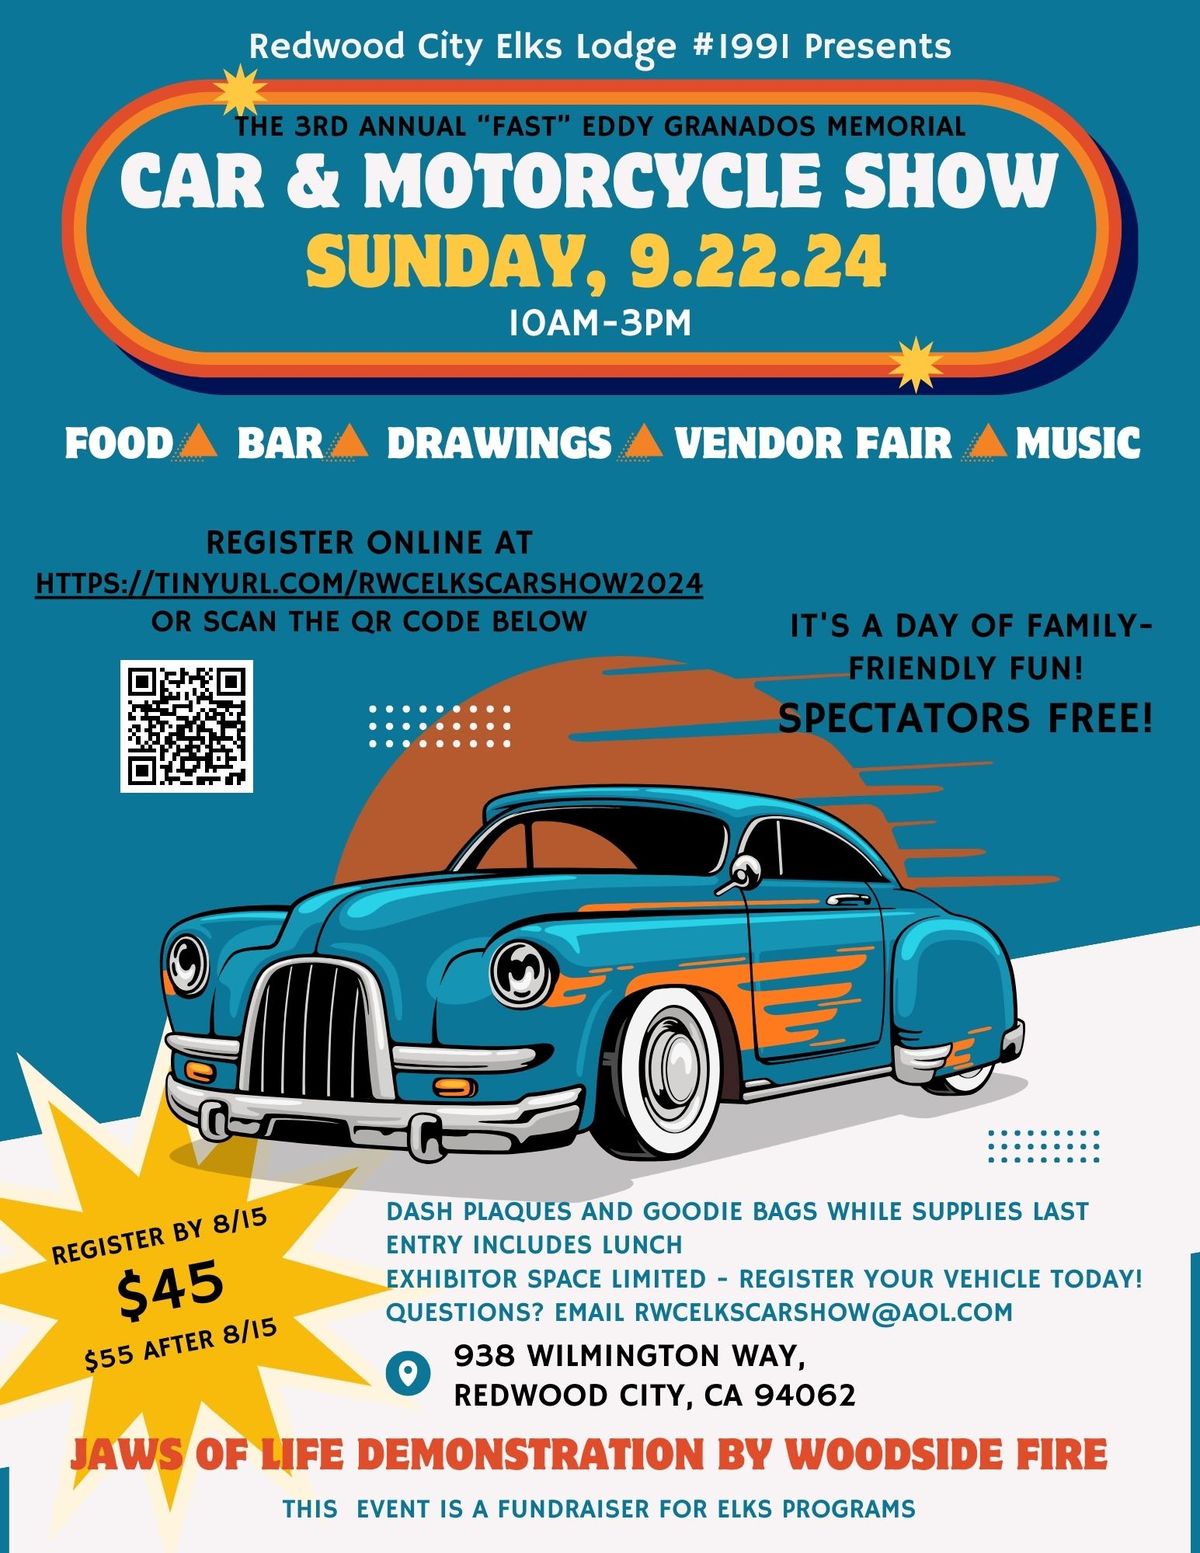 Redwood City Elks #1991 Car and Motorcycle Show